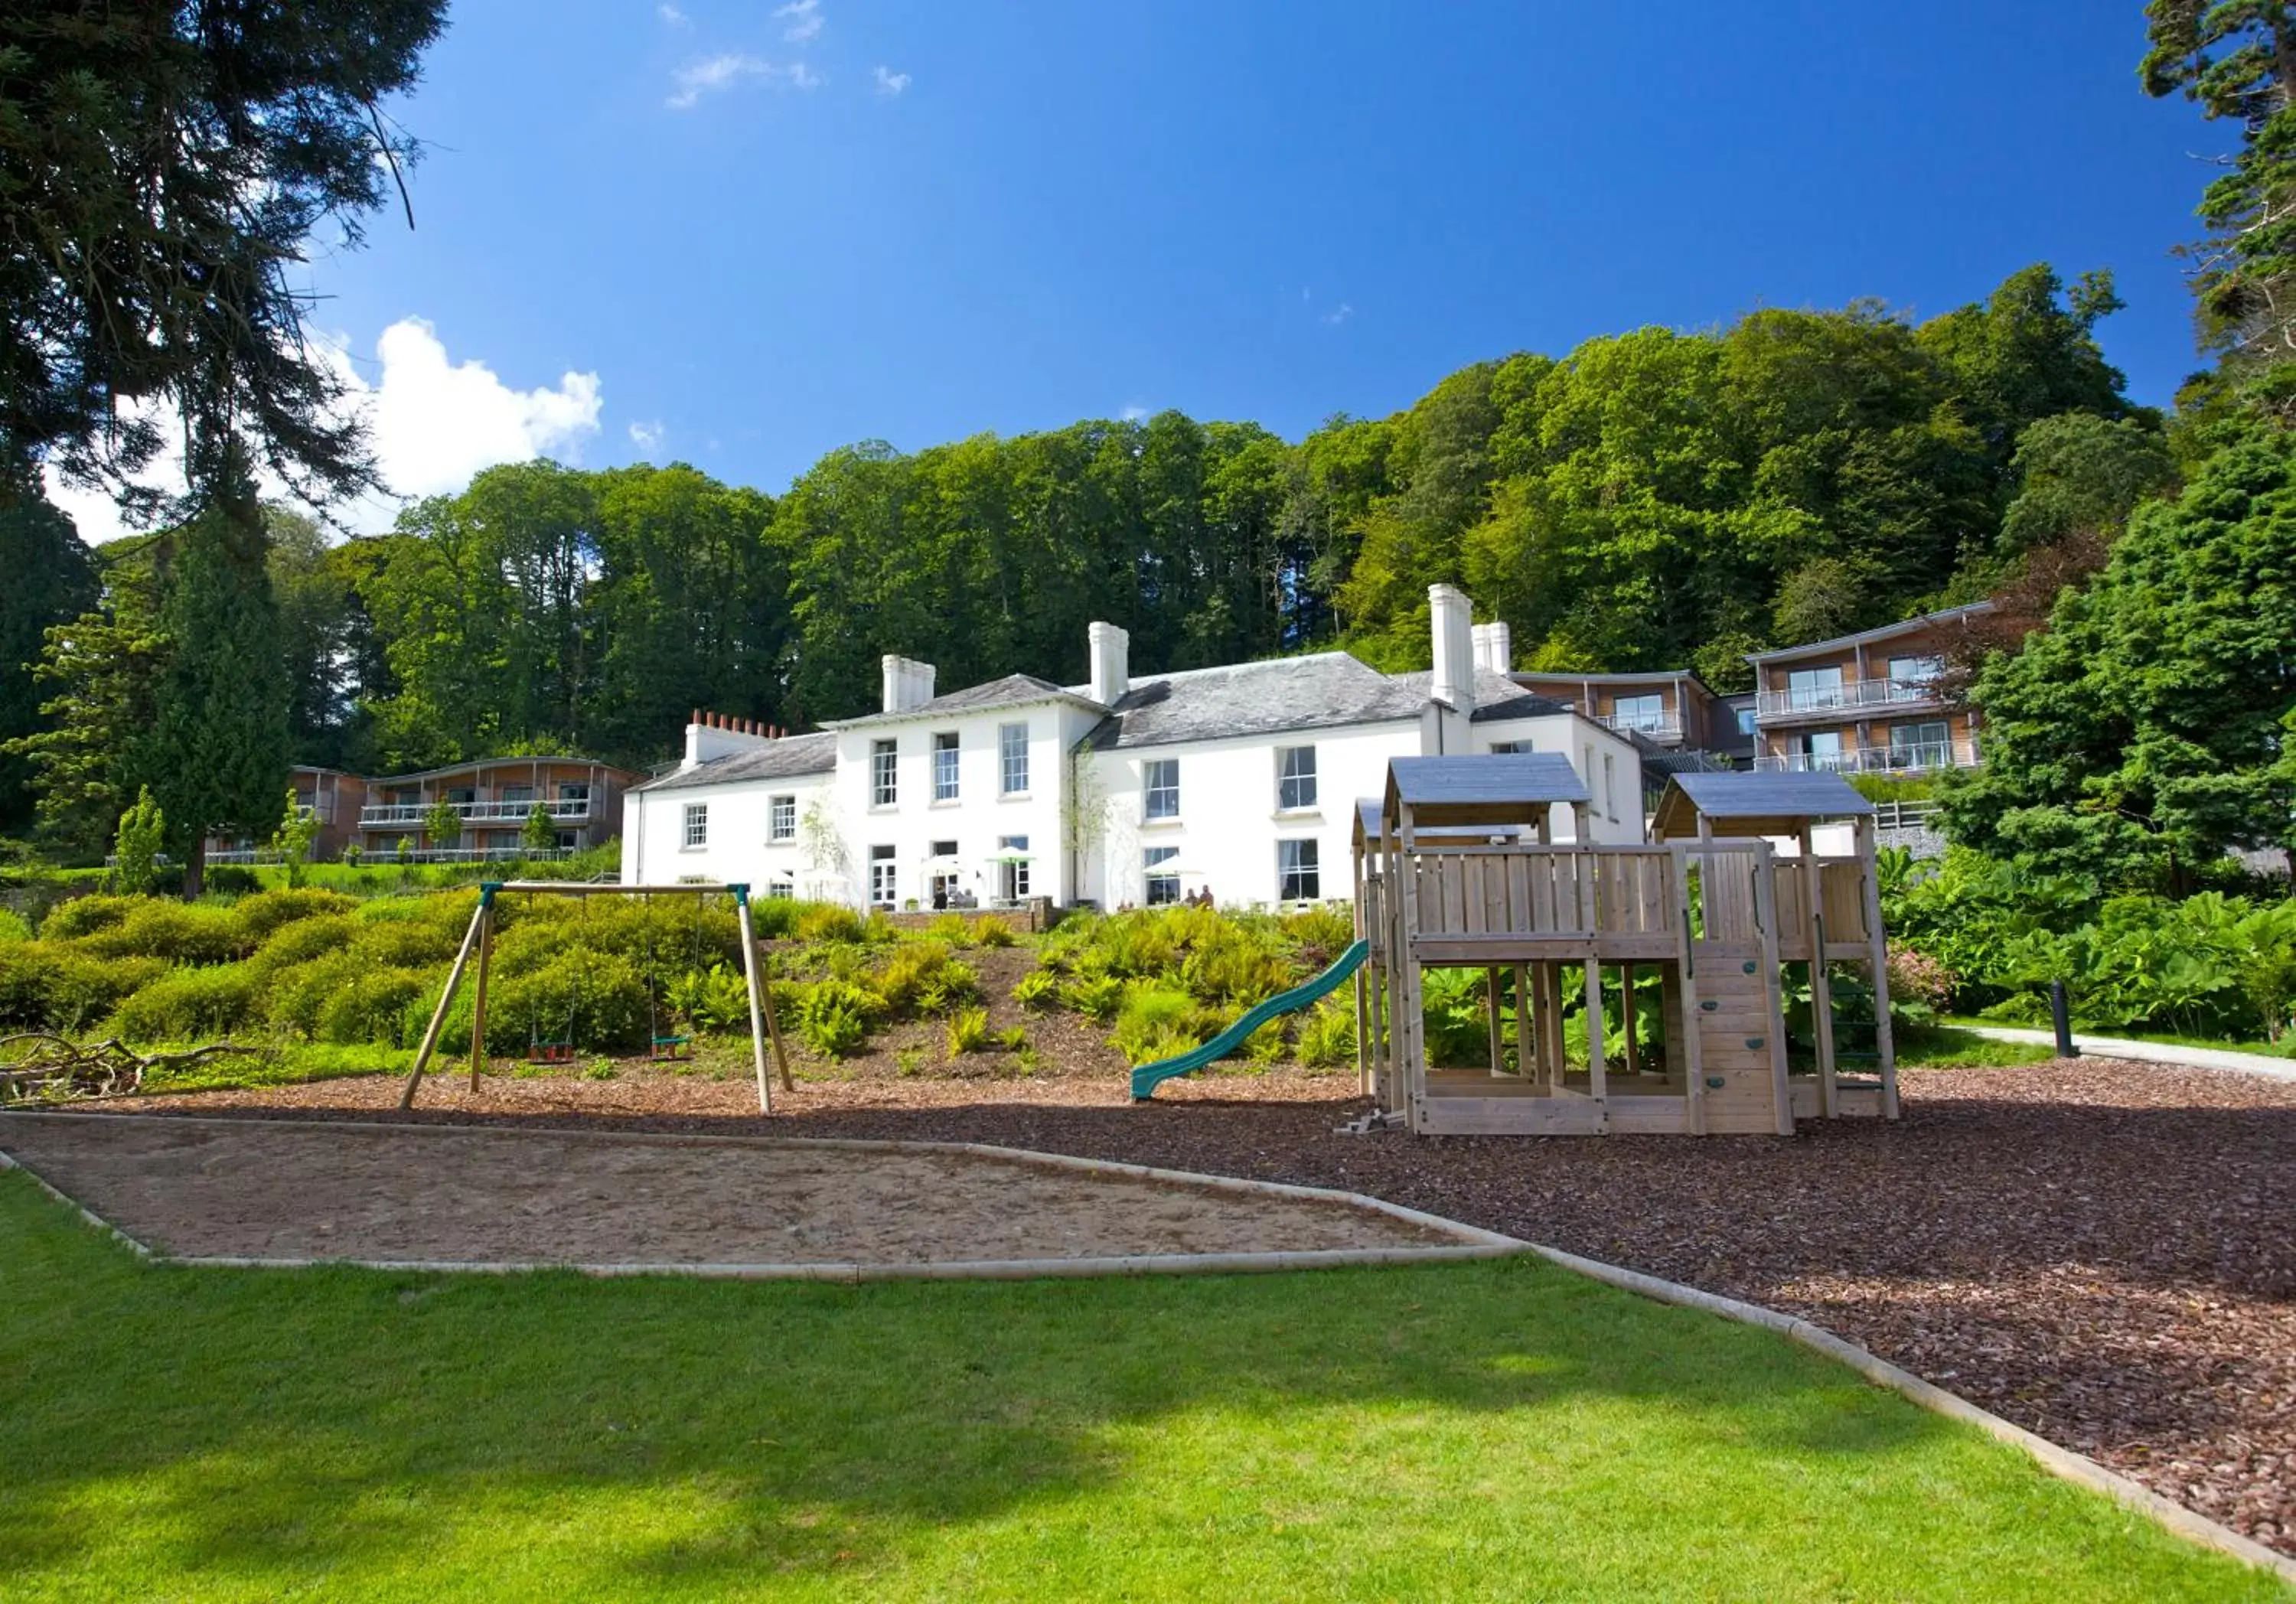 Children play ground, Property Building in The Cornwall Hotel Spa & Lodges